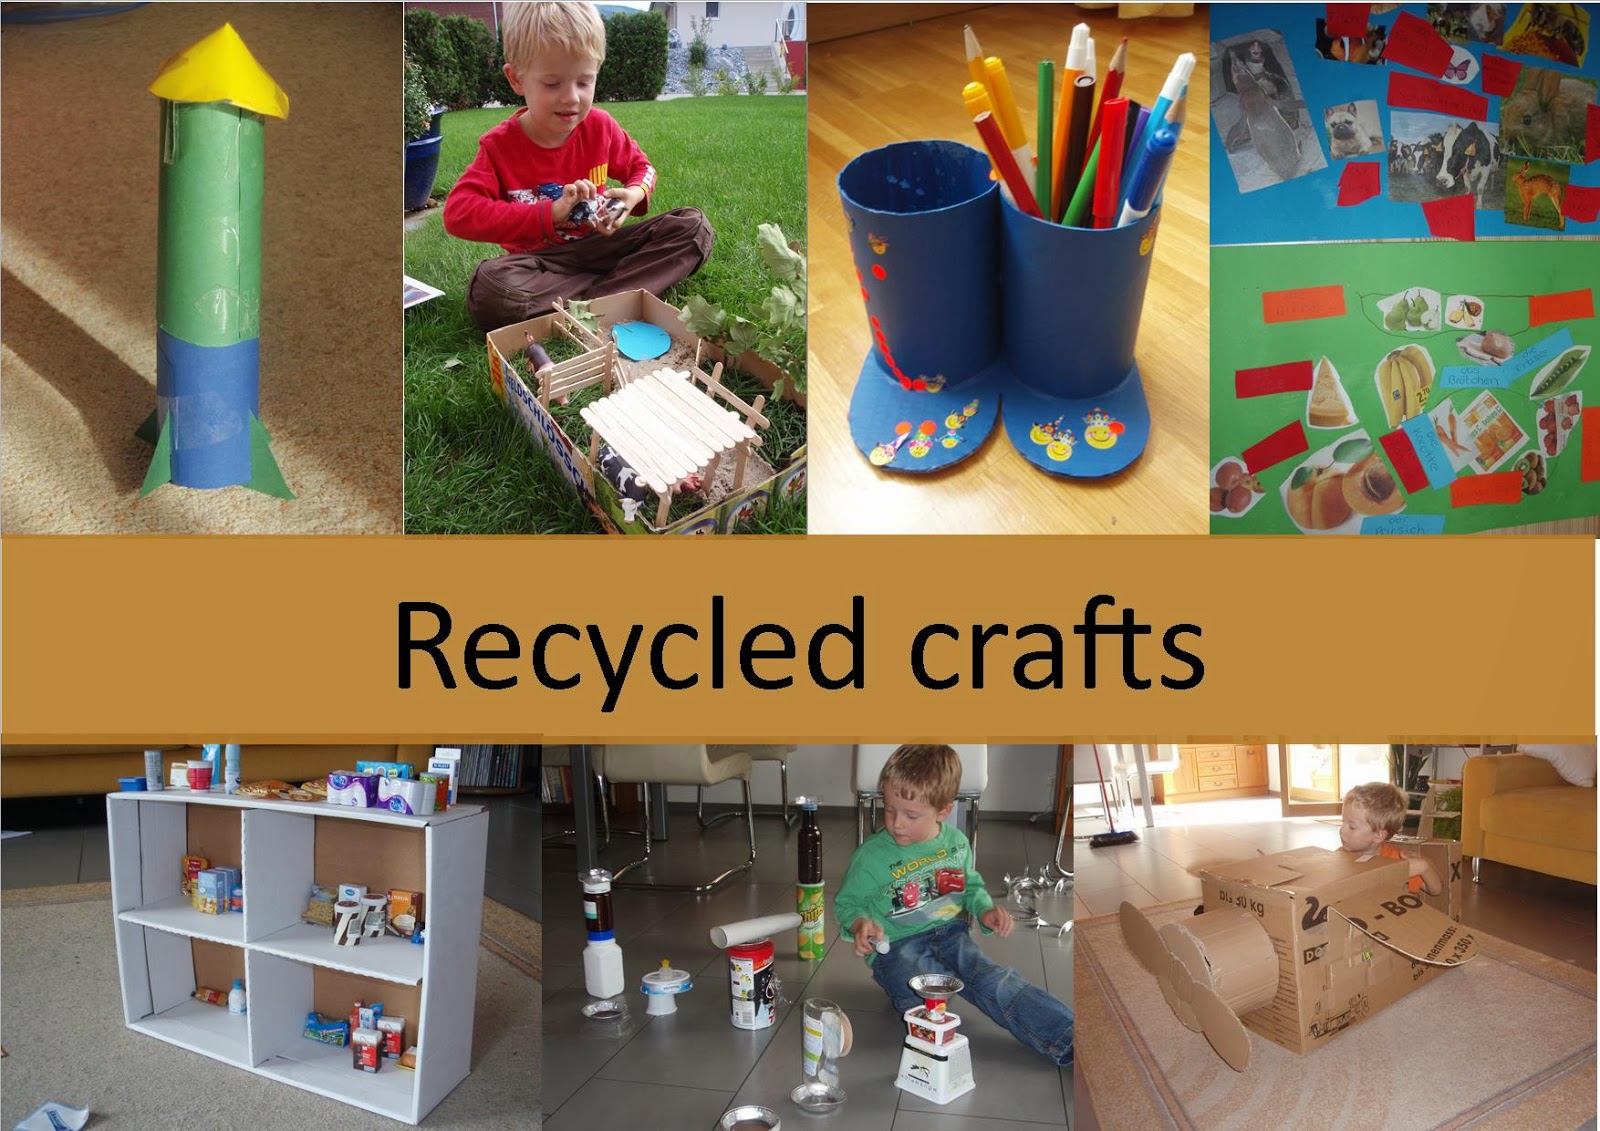 Mothers Messy Madness: Recycled crafts.